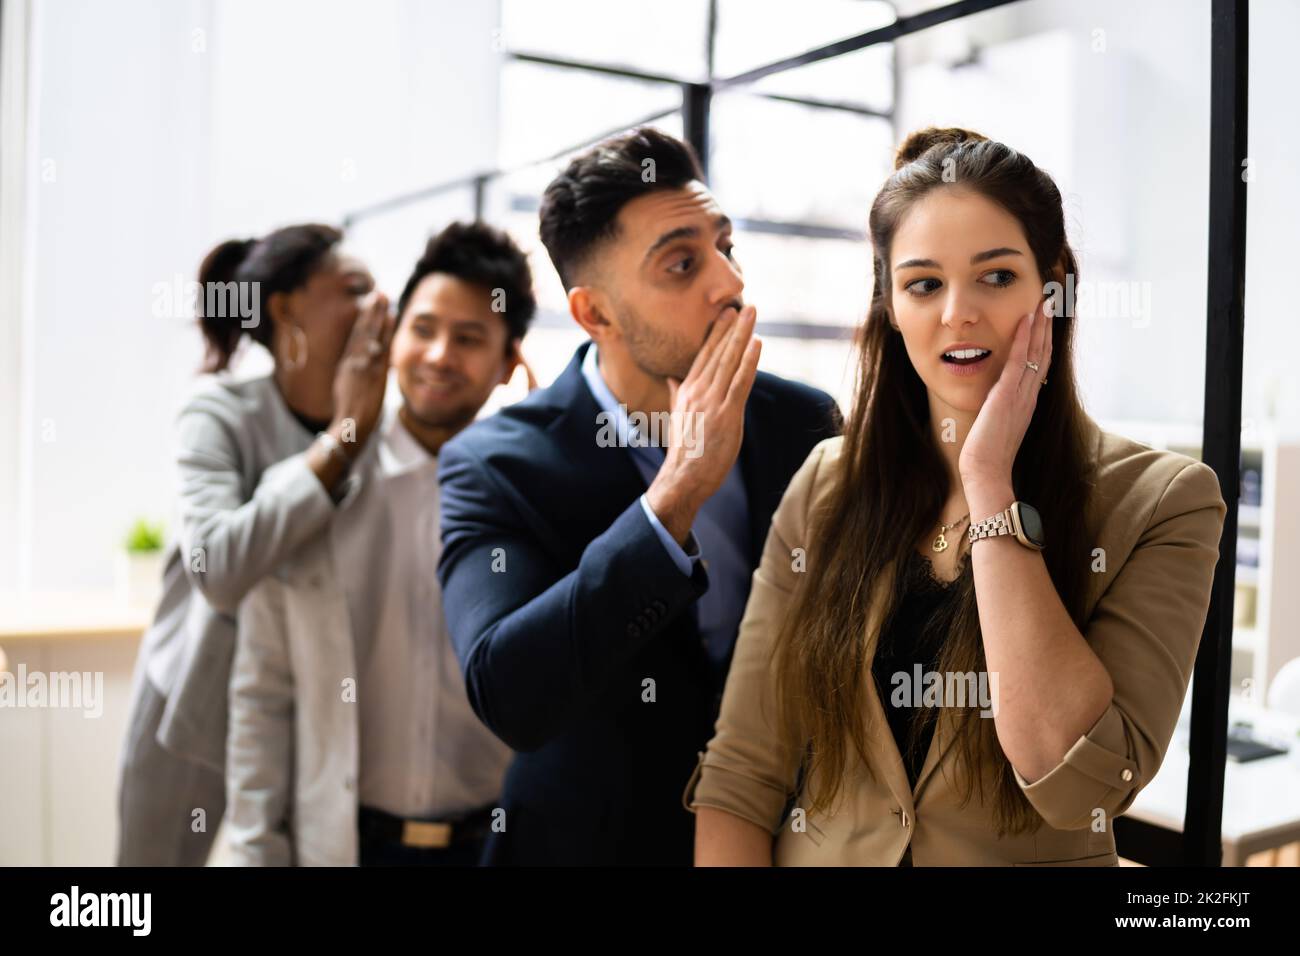 Business Colleague Whispering Secret Gossip To An Man Stock Photo